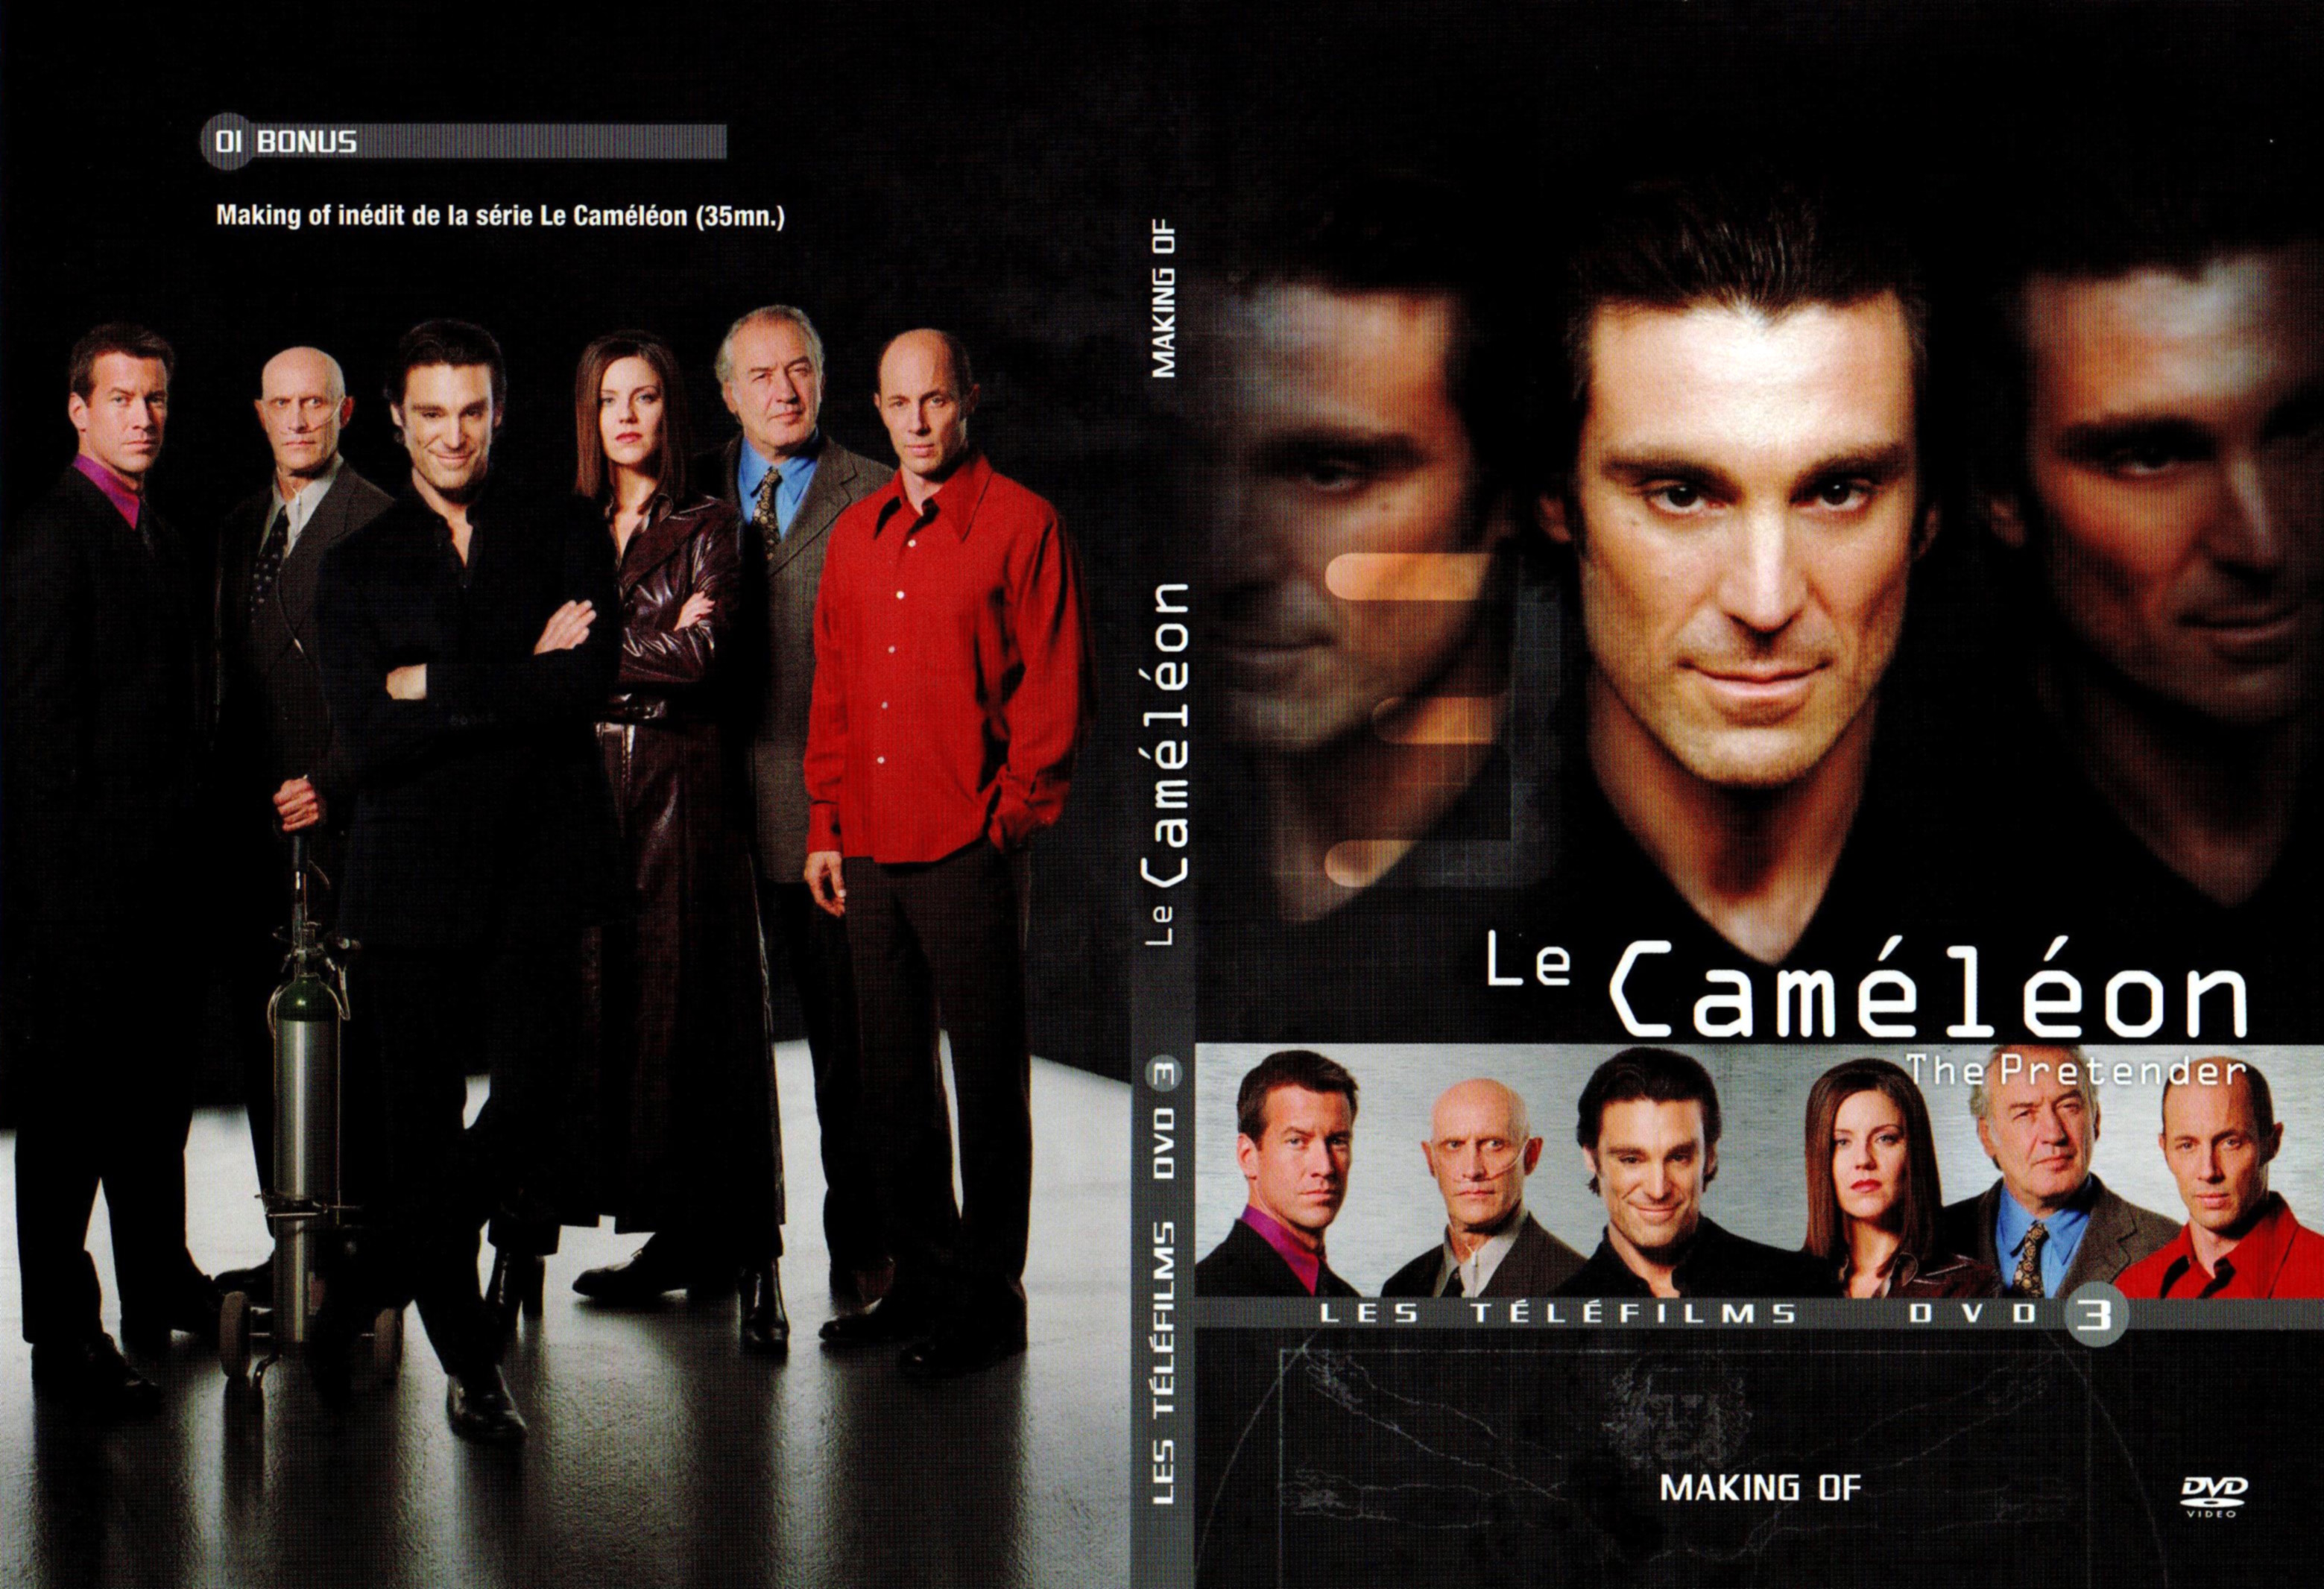 Jaquette DVD Le camlon Tlfilms - Making of